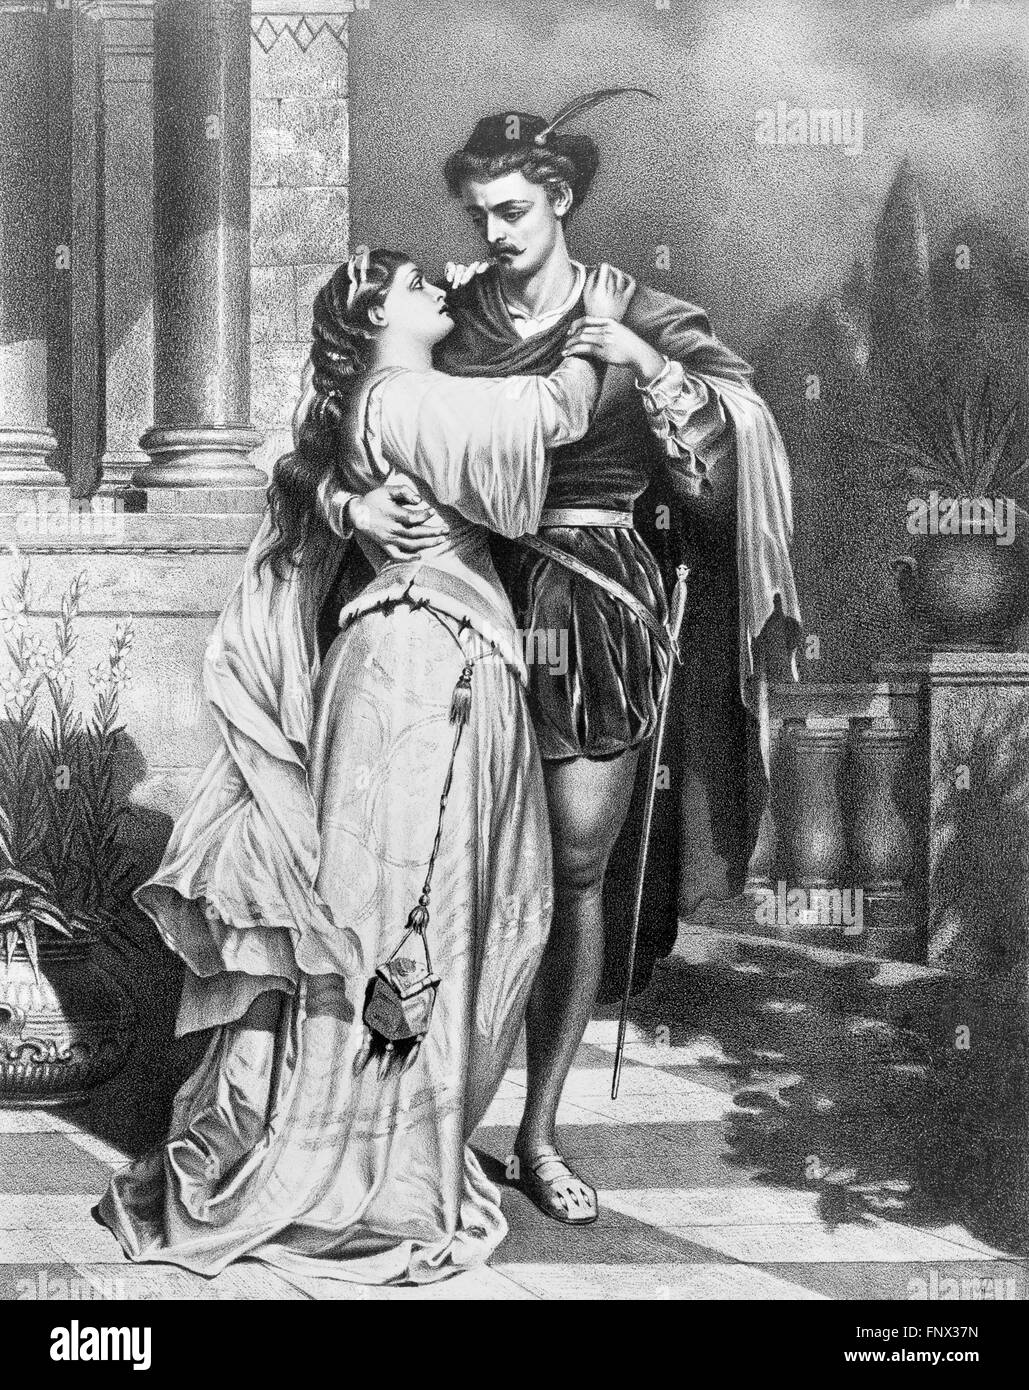 Romeo and Juliet. A 19thC poster advertising Shakespeare's 'Romeo and Juliet', 1879. Stock Photo